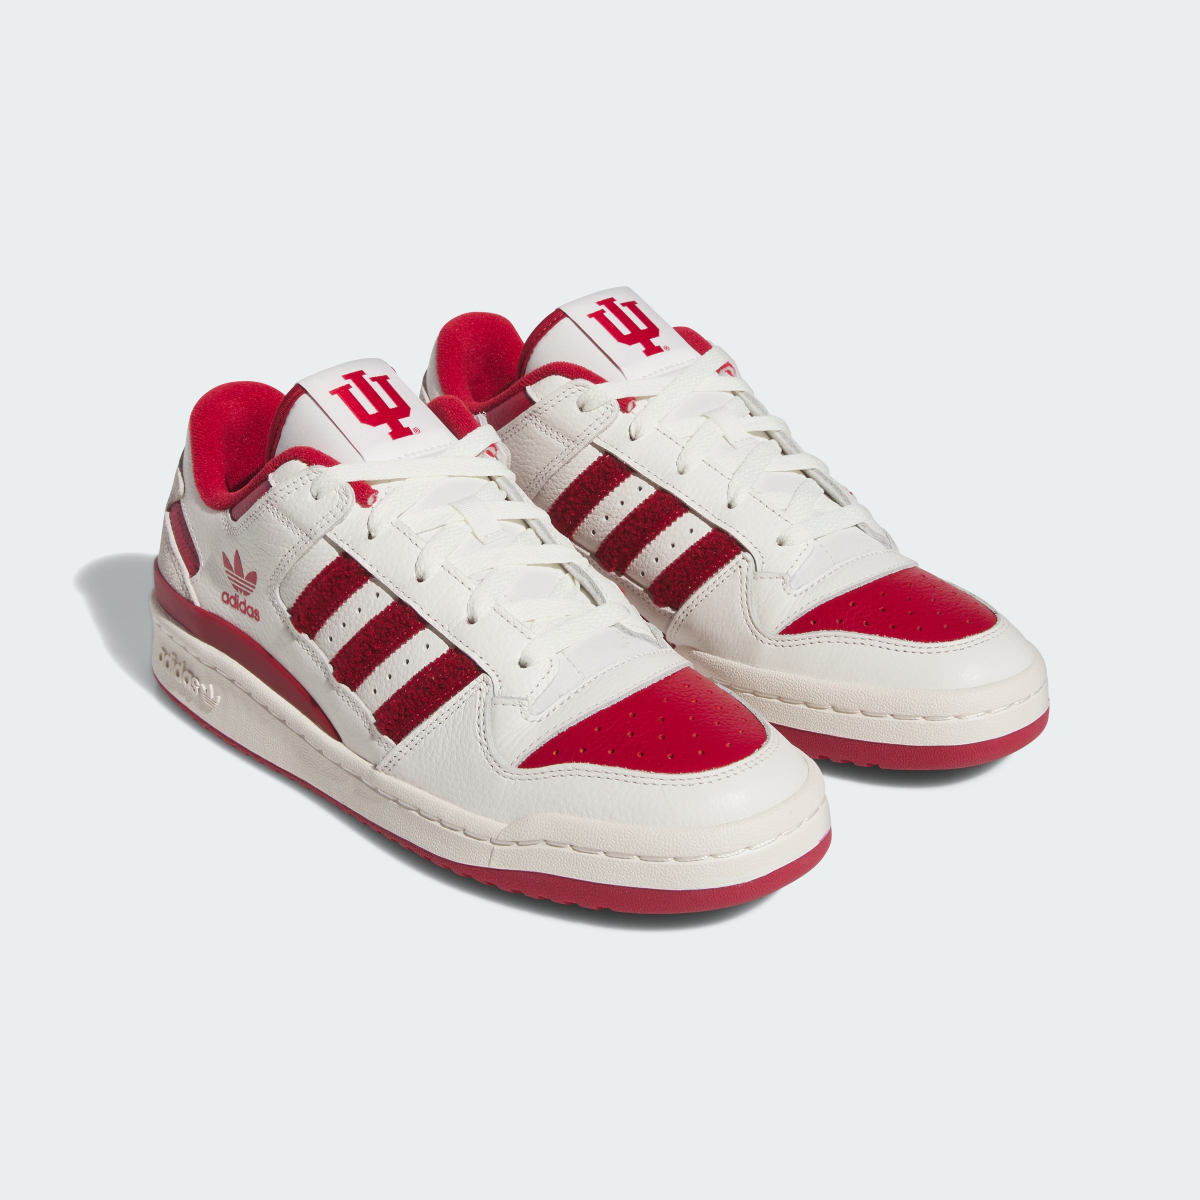 Adidas Indiana Forum Low Shoes. 5